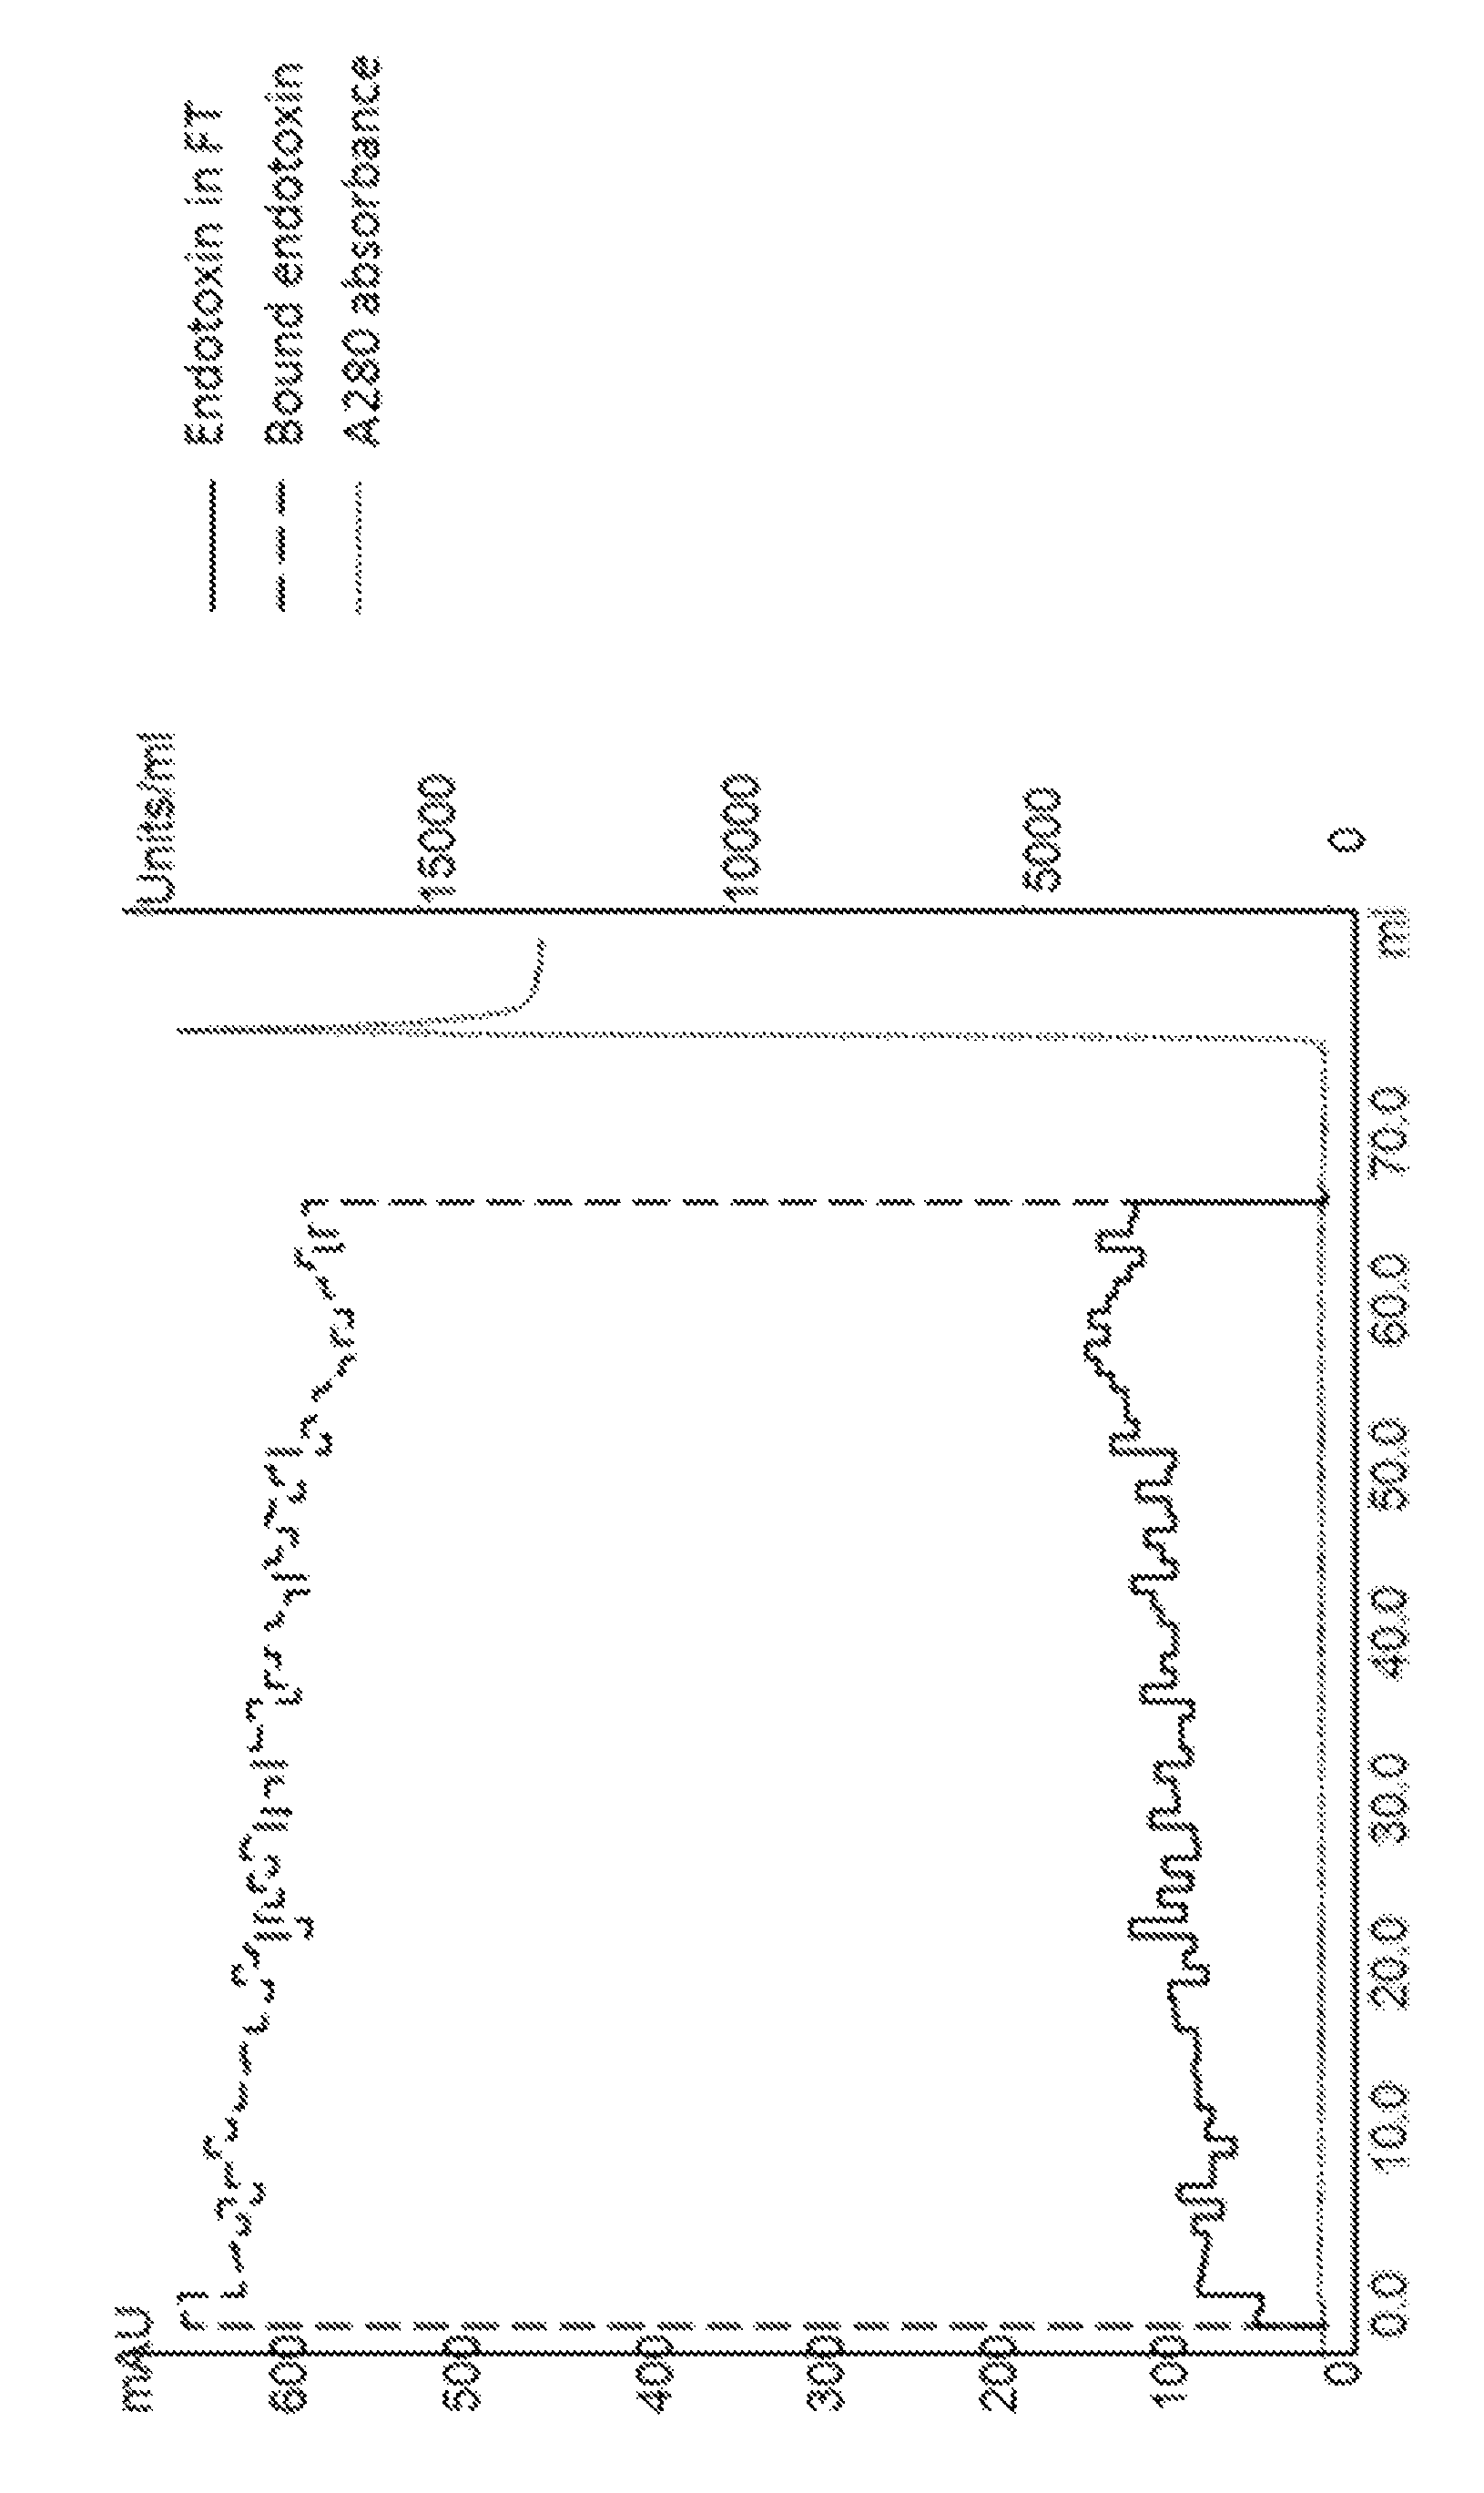 Method for endotoxin removal